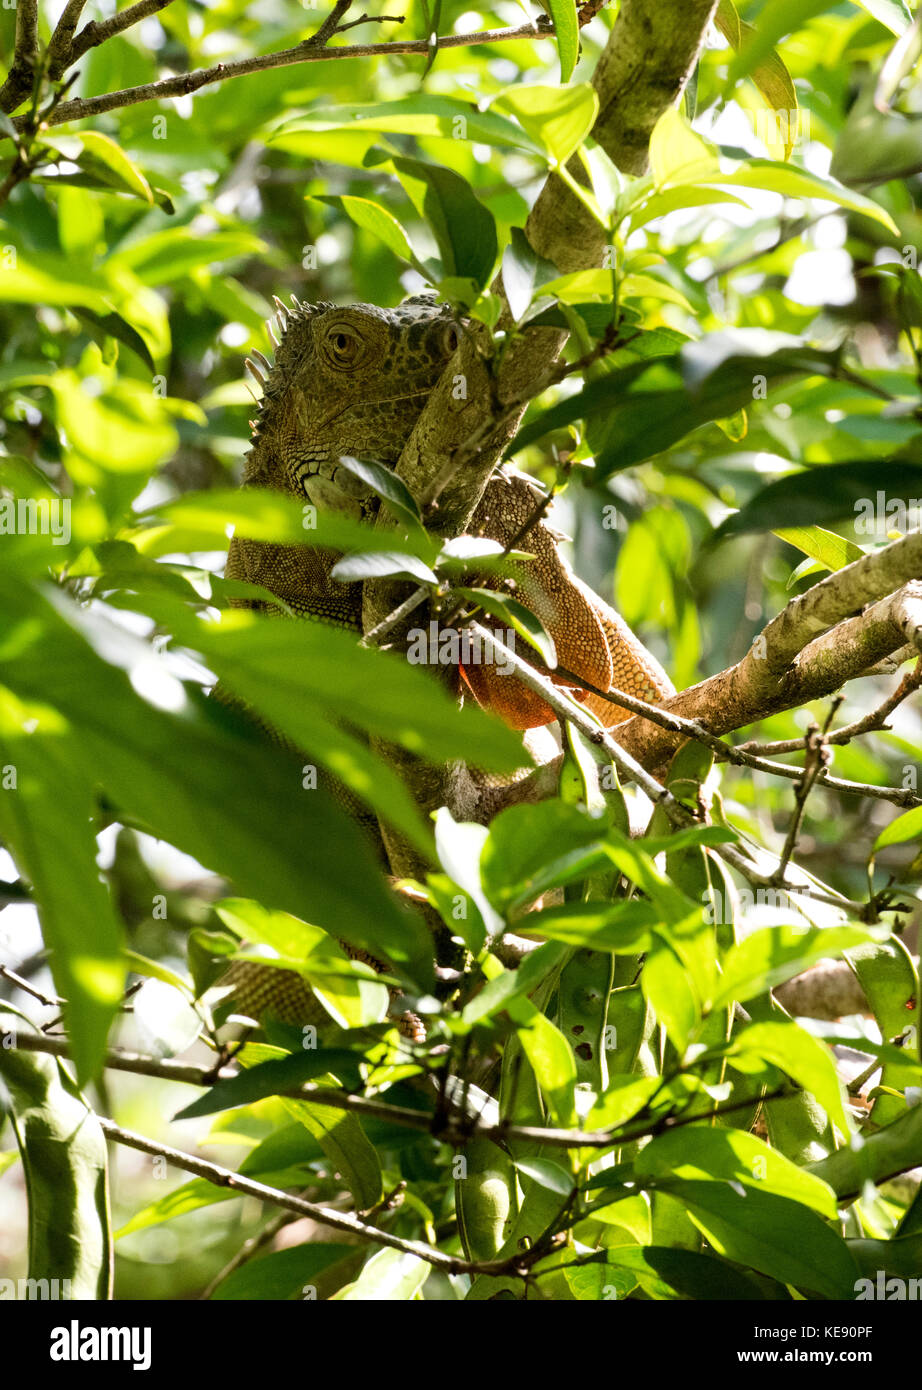 Green Iguana looking down from a branch in a tree. Sarapiqui, Heredia, Costa Rica Stock Photo